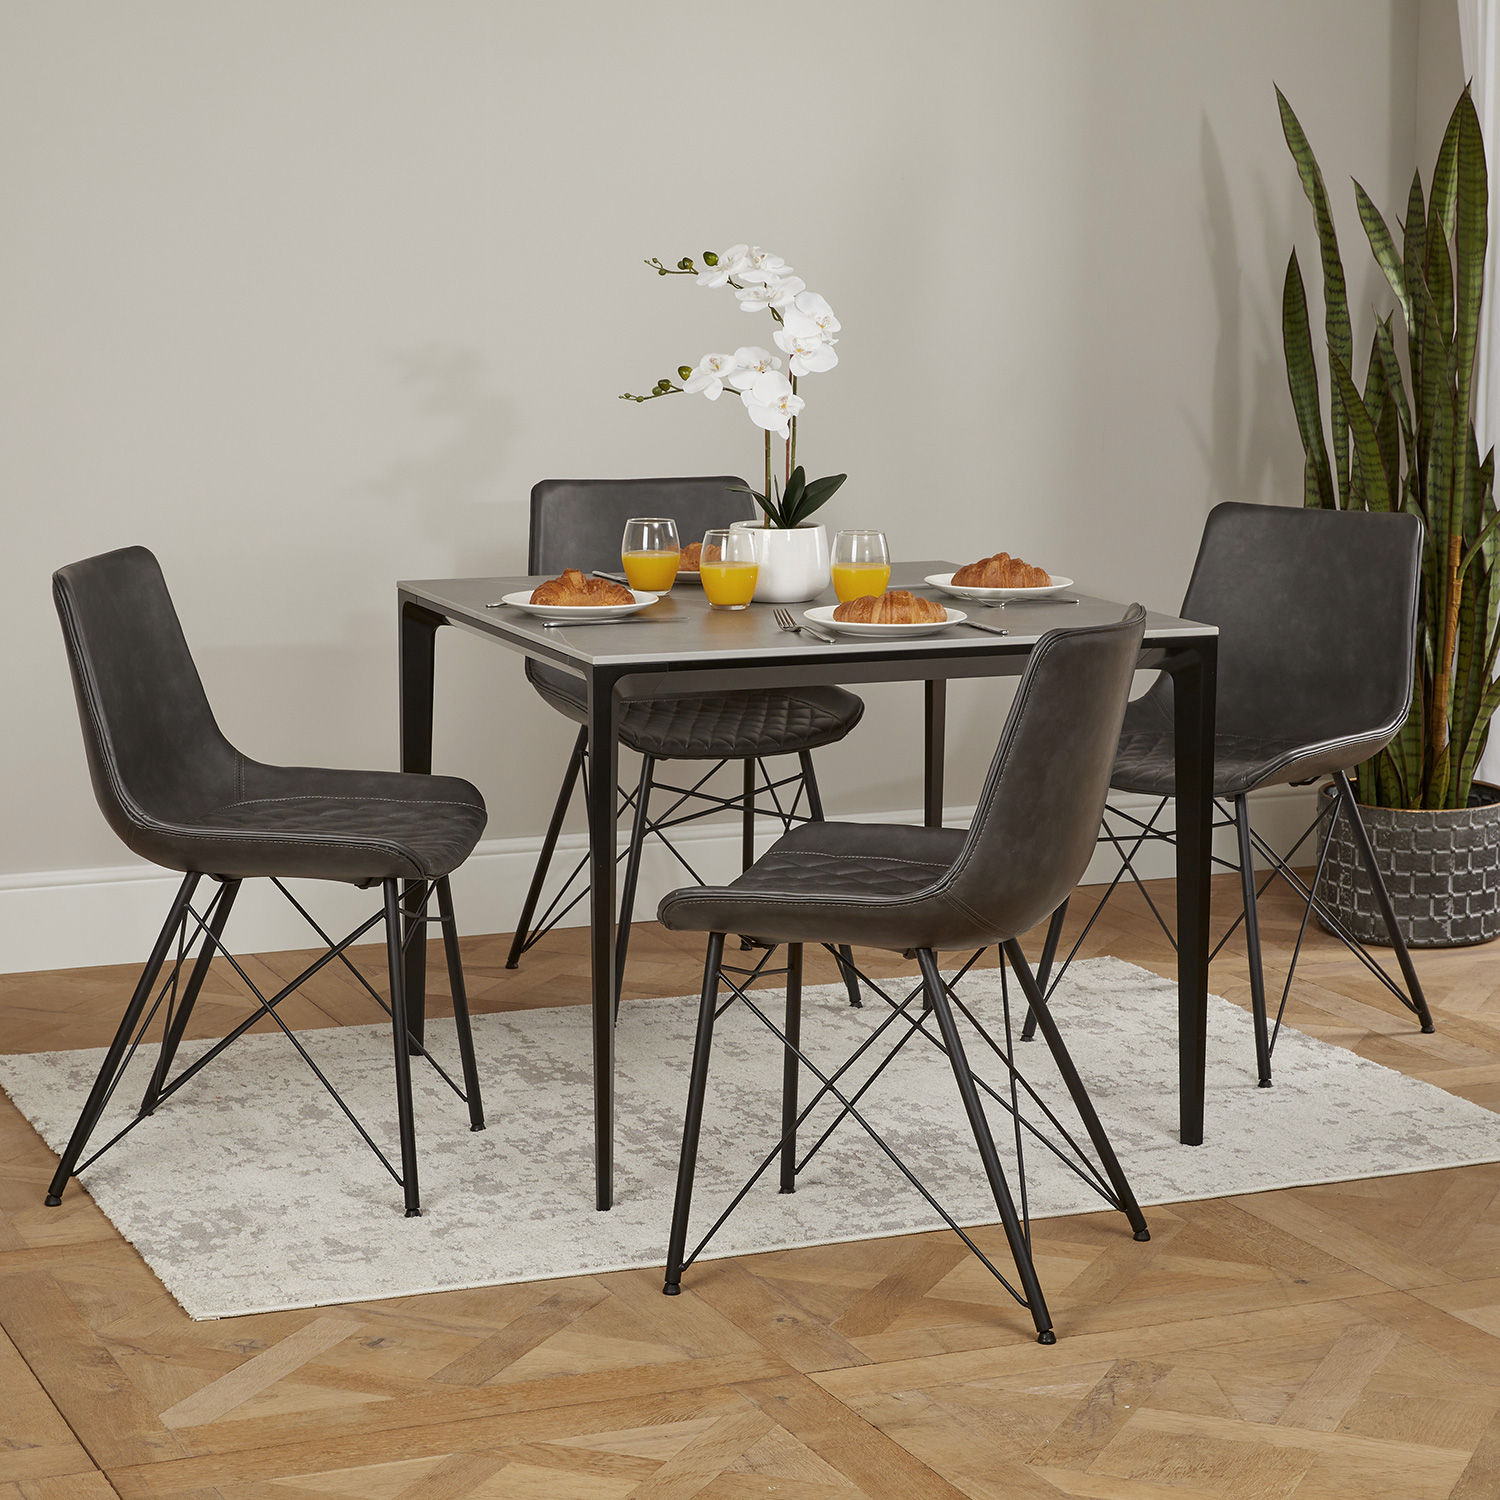 Bellagio 90cm Square Grey Sintered Stone Dining Table Set with 4x Leon Grey Dining Chairs